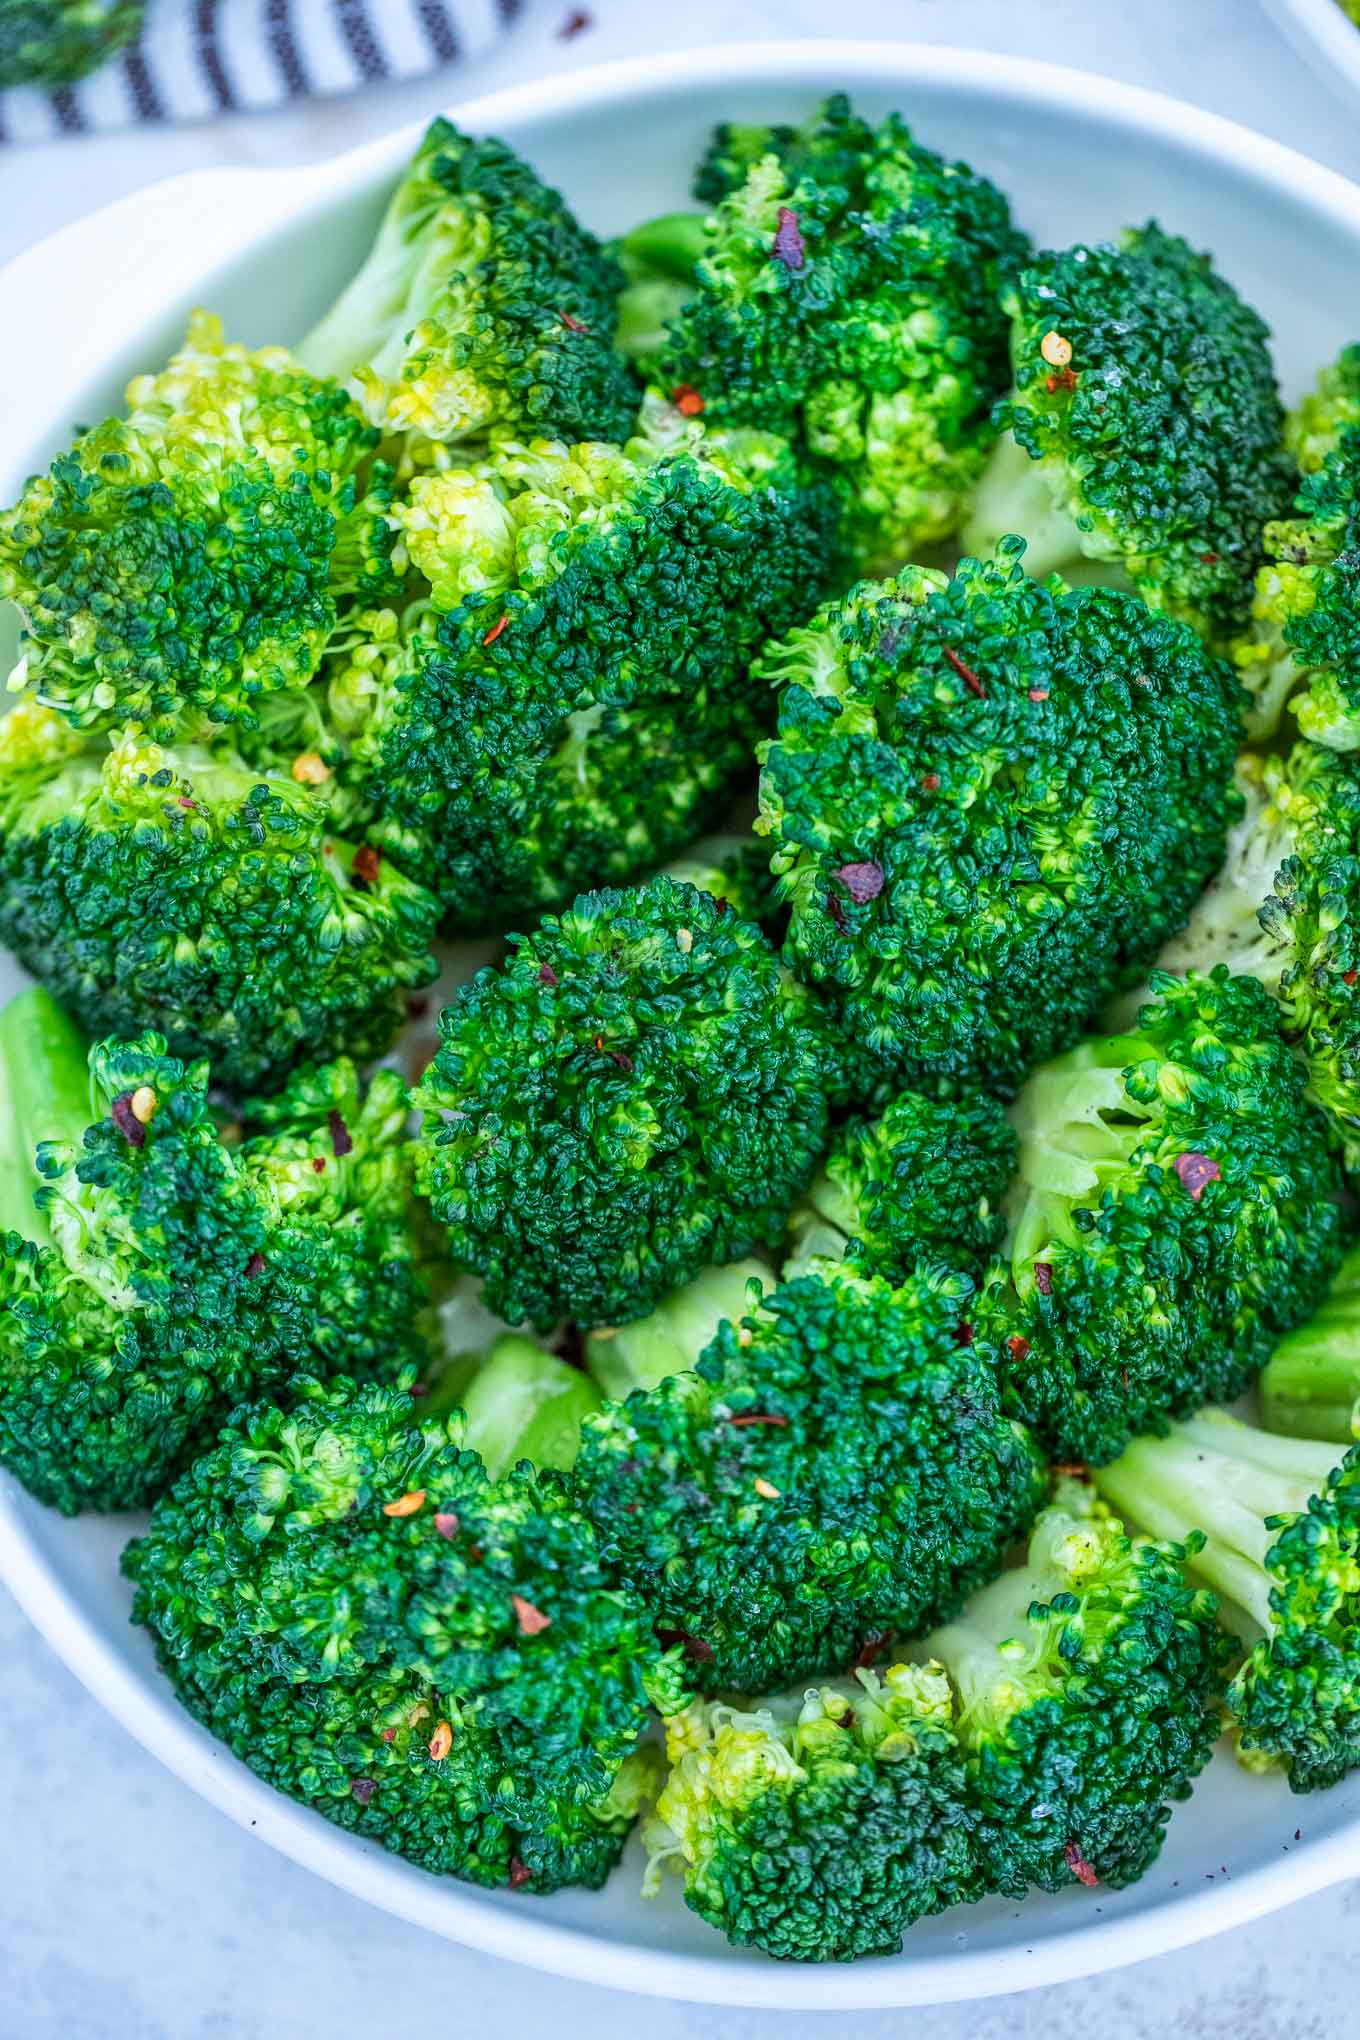 Steamed Broccoli Recipe Video Sweet And Savory Meals,Manhattan Drink Png